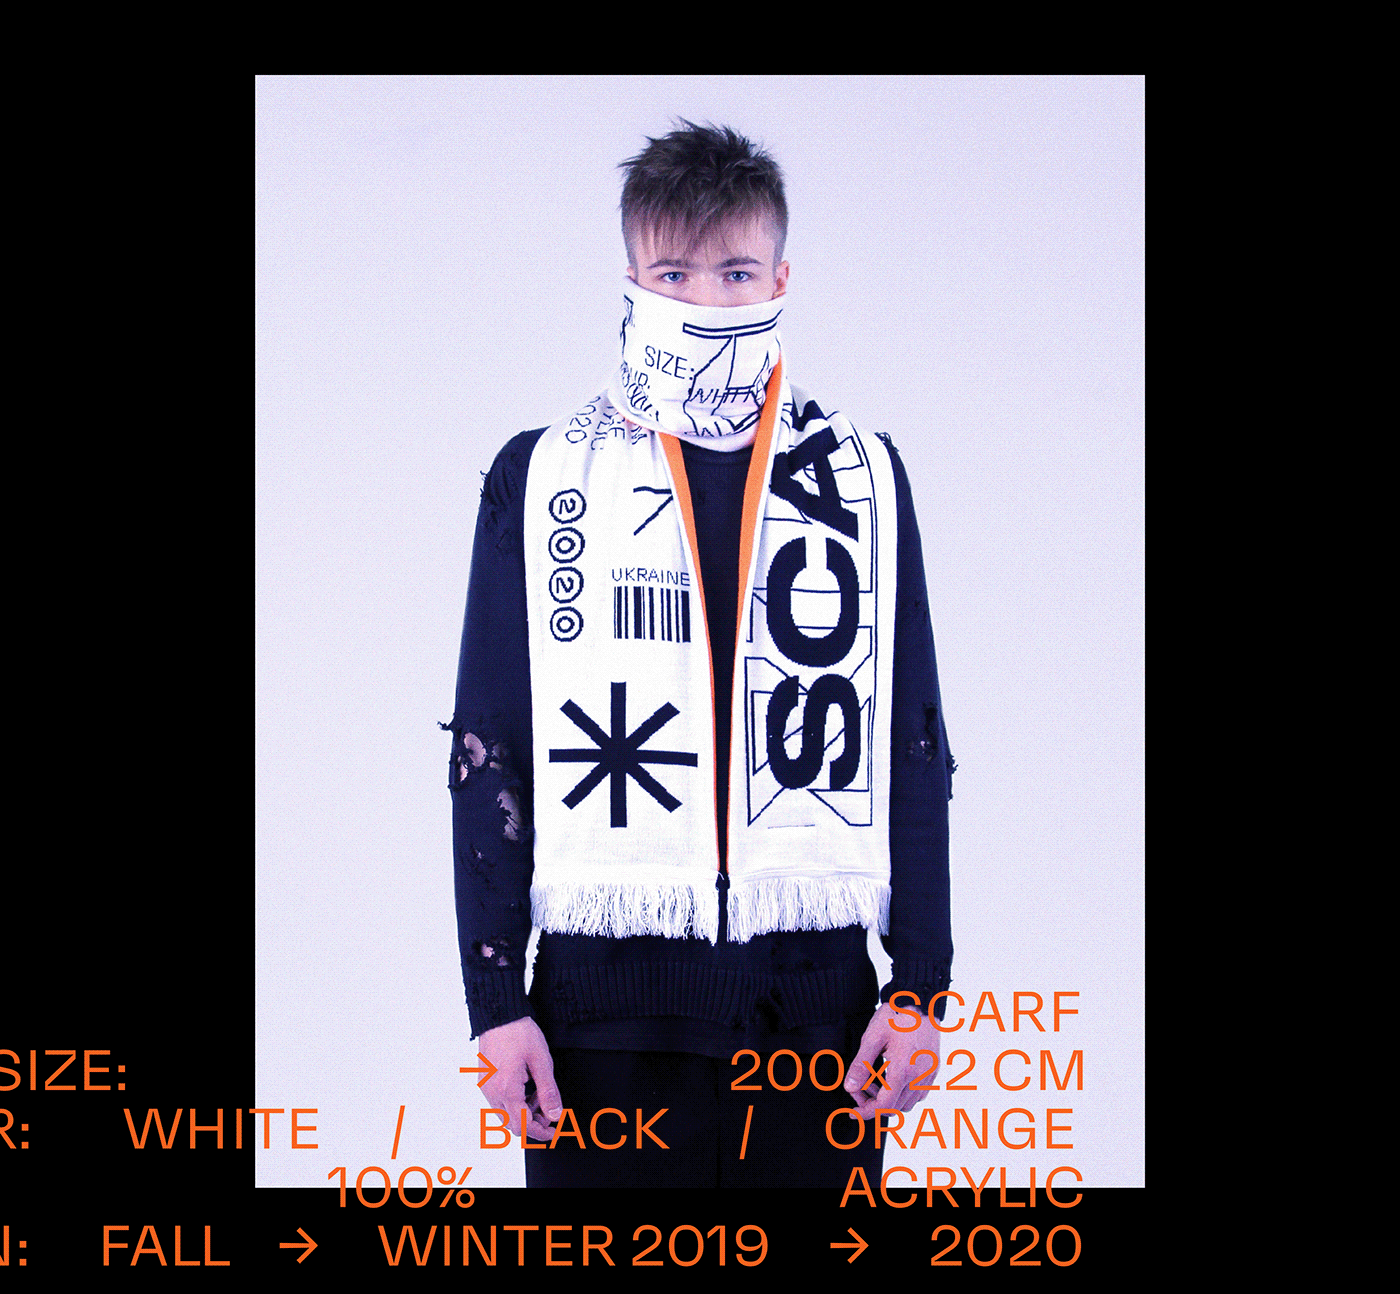 scarf winter Clothing apparel Fashion  metamodern typography   product branding  scarves